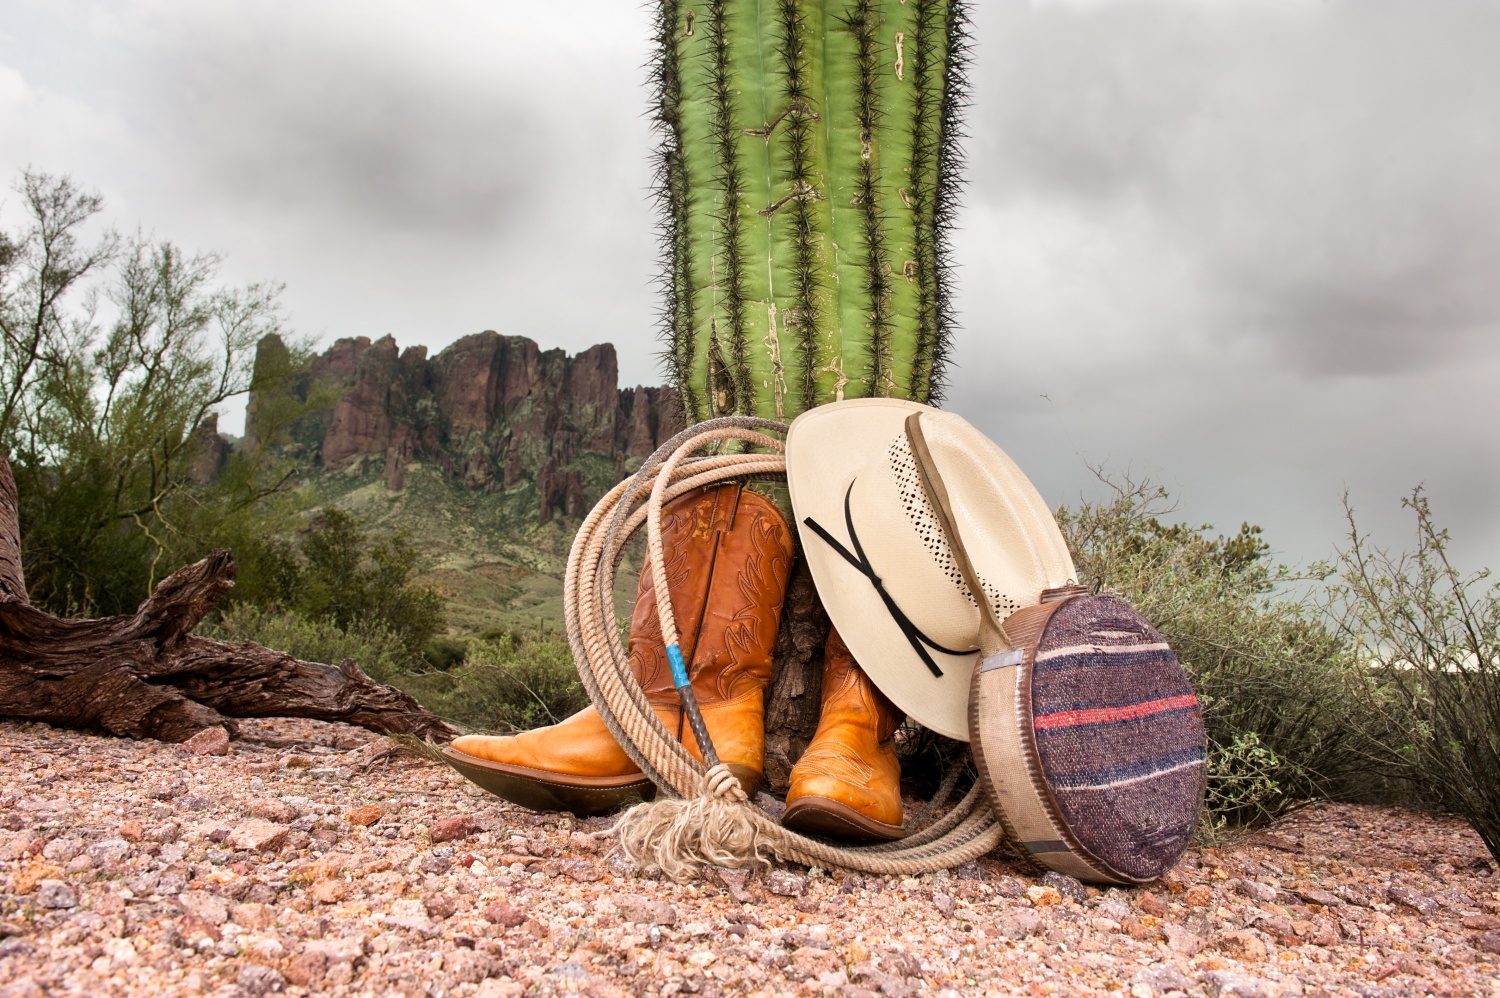 Photograph of cowboy boots and hat resting on a cactus.